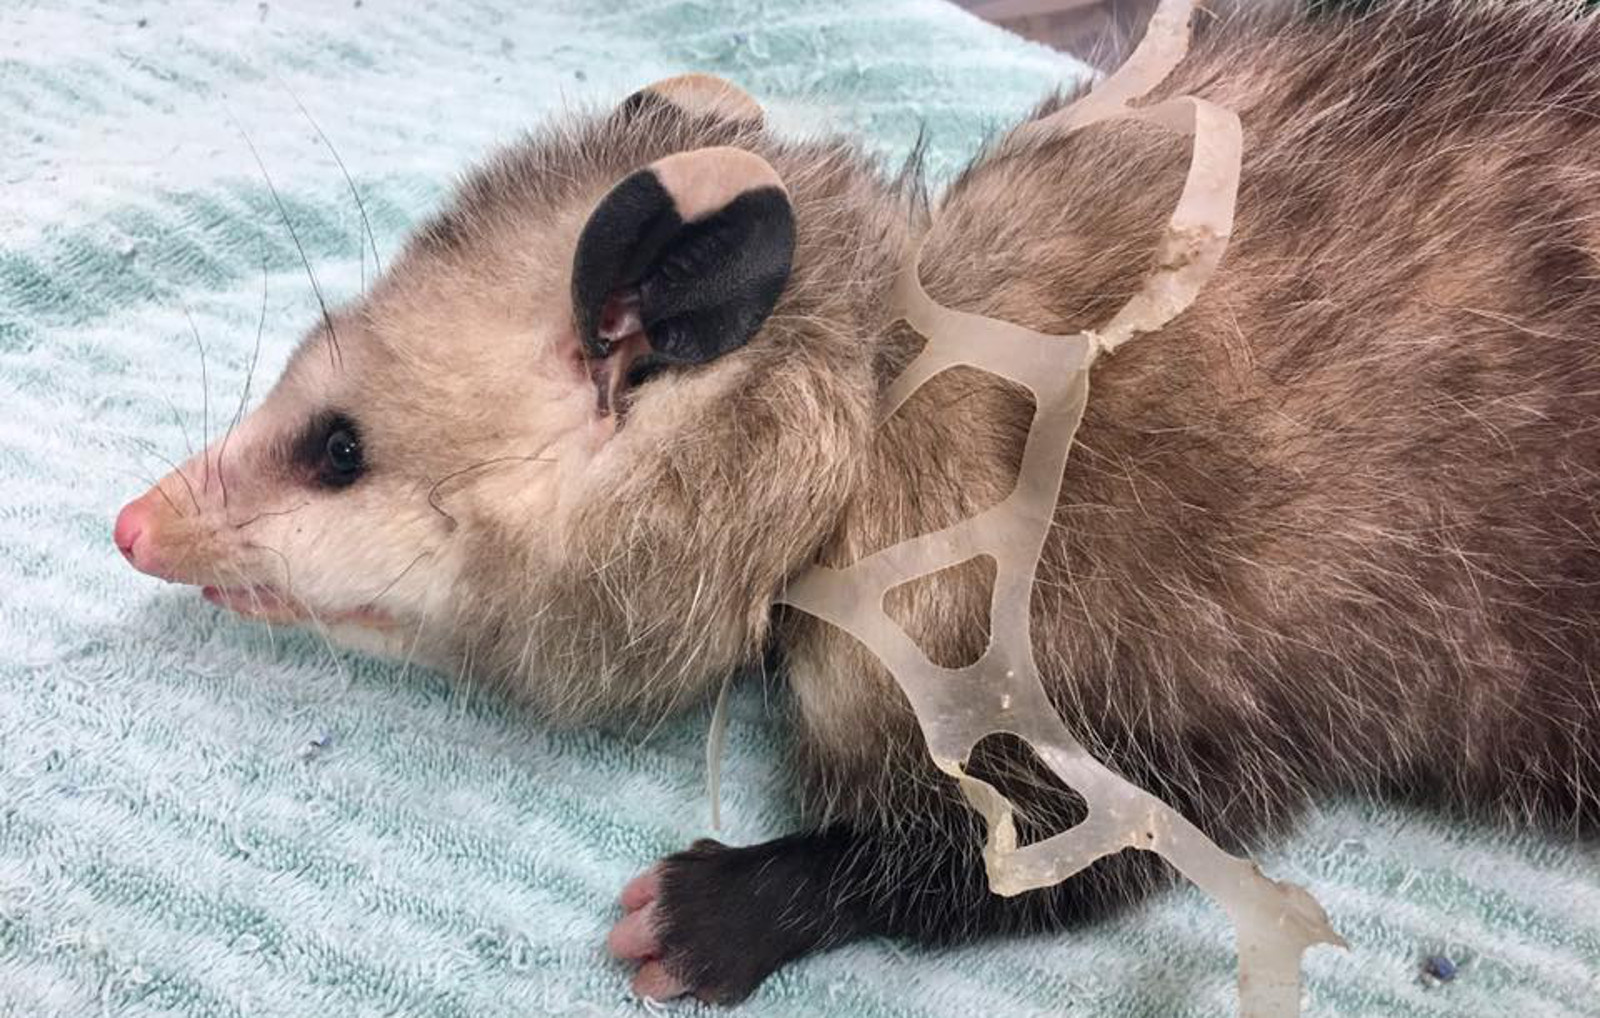 Photo of an Opossum with Plastic Embedded In Its Neck Shows the Devastating Impact of Plastic Trash